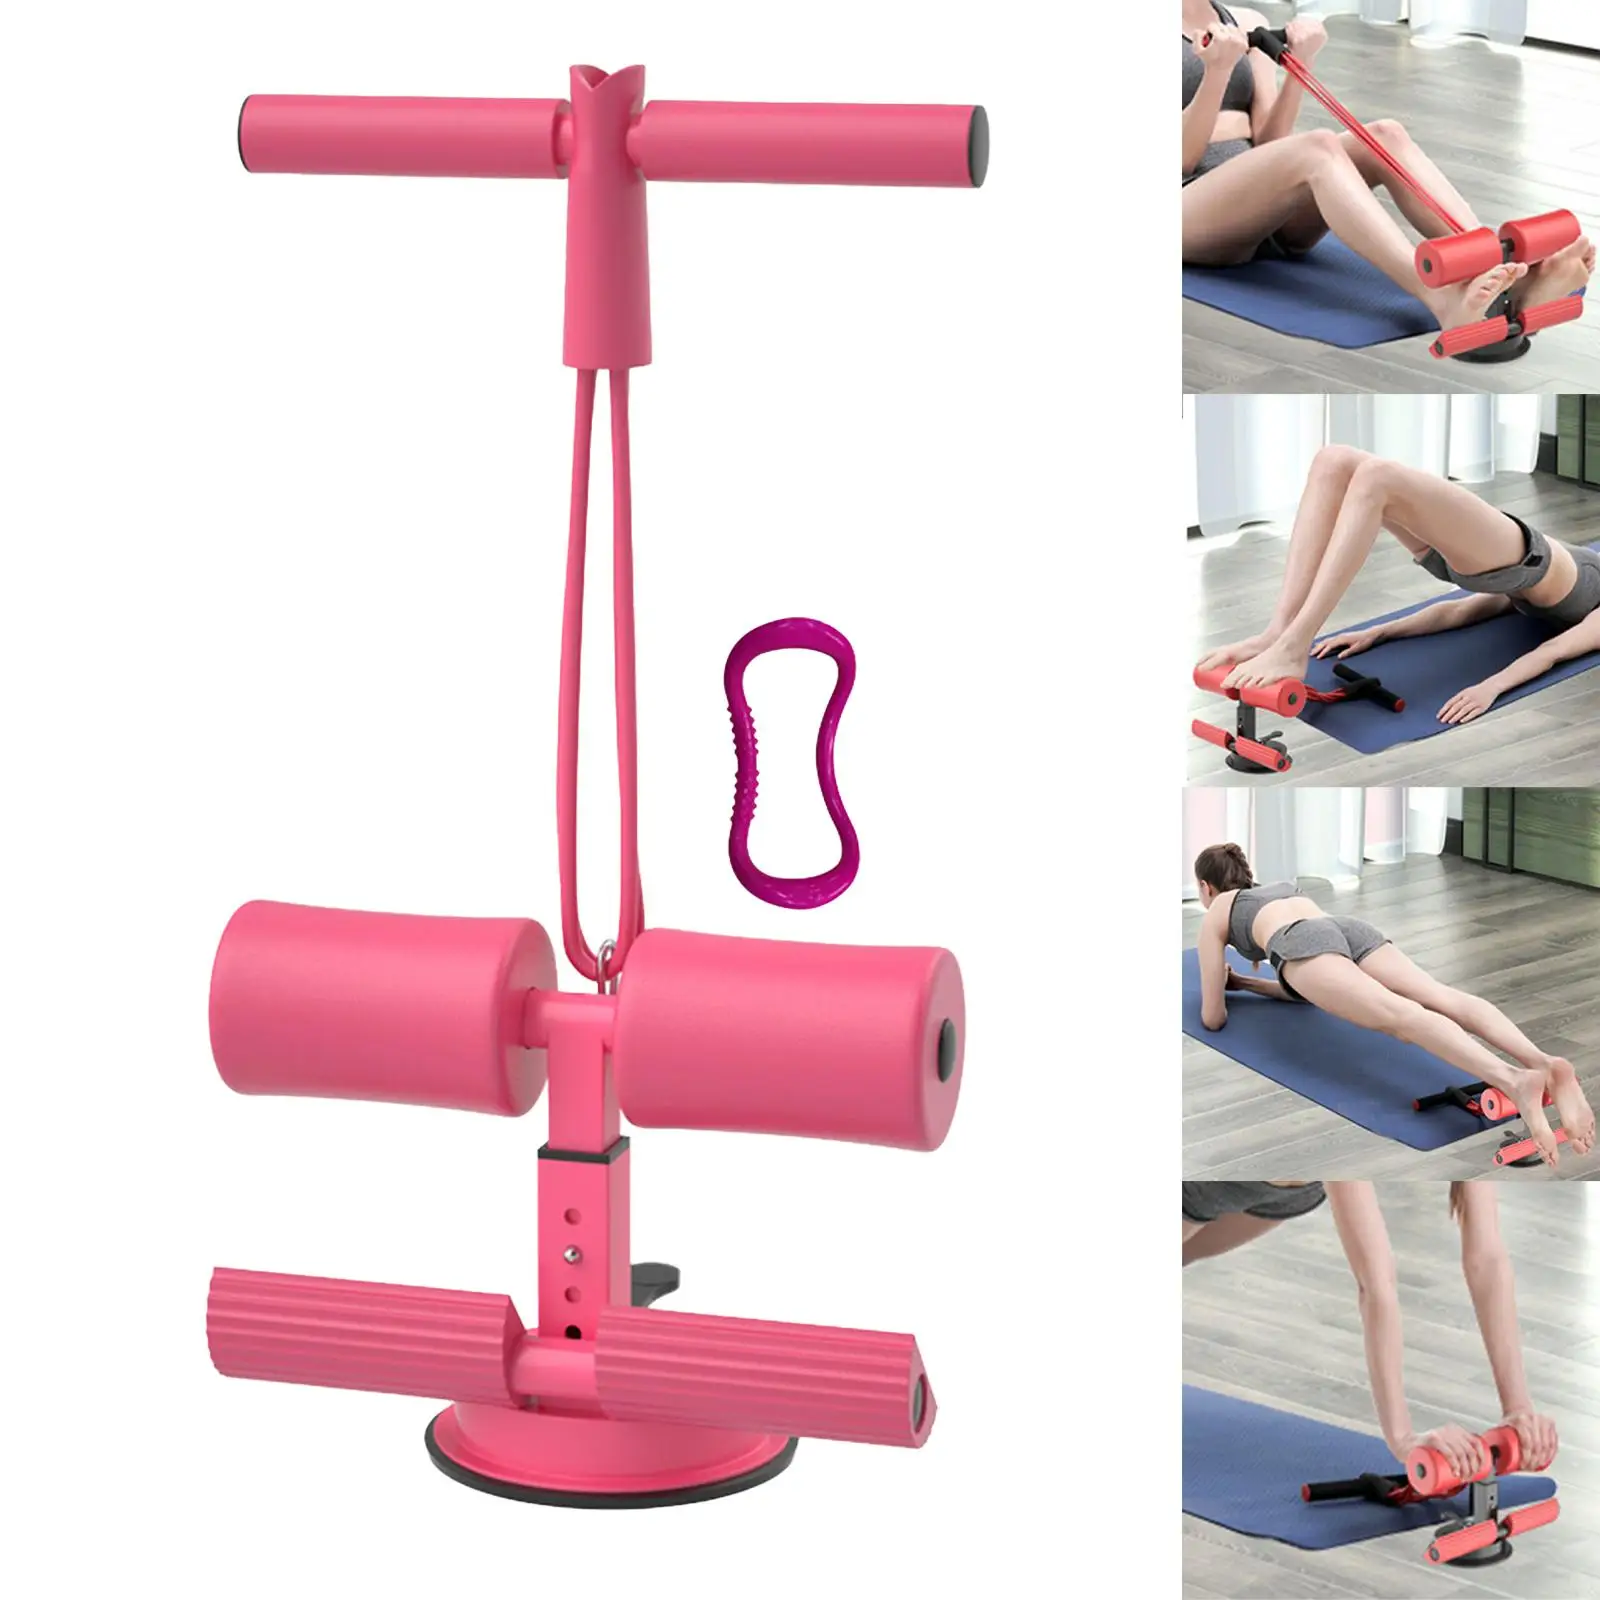 Ankle Support Attachment Machine Adjustable Abdominal Equipment Device Portable Sit up Rack for Fitness Workout Sports Travel